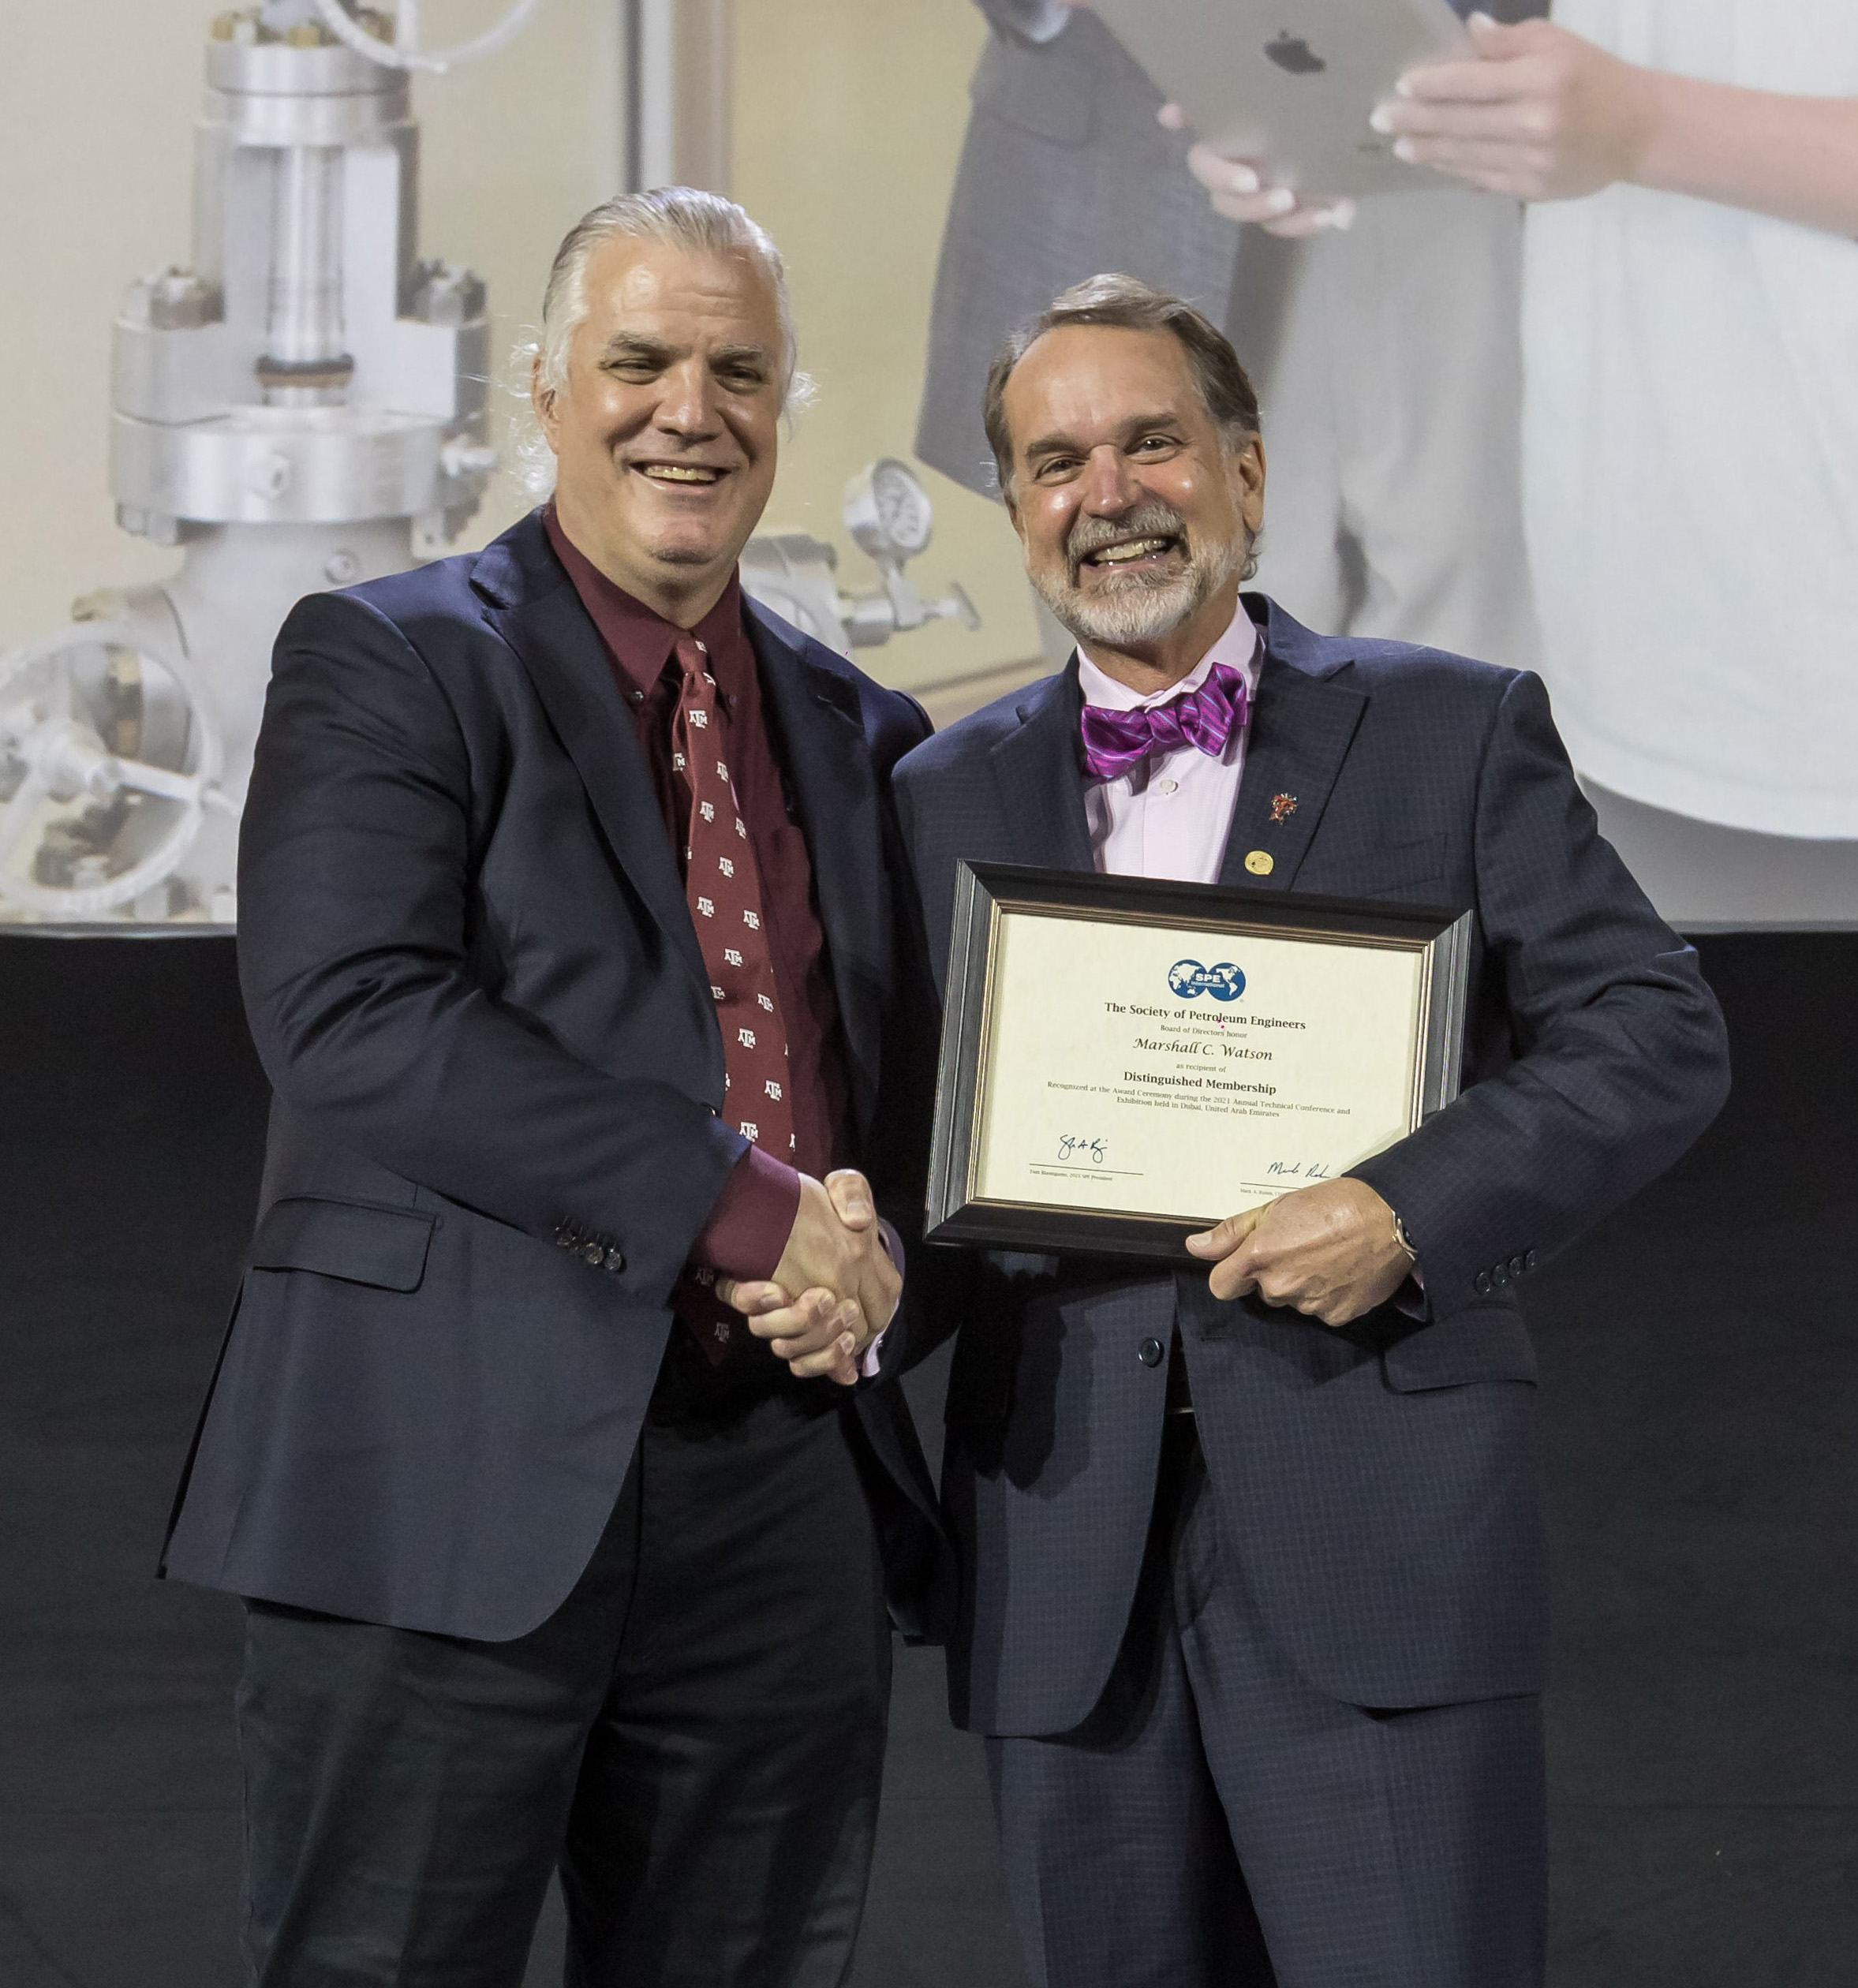 Dr. Marshall C. Watson Receives SPE Distinguished Membership from Society of Petroleum Engineers